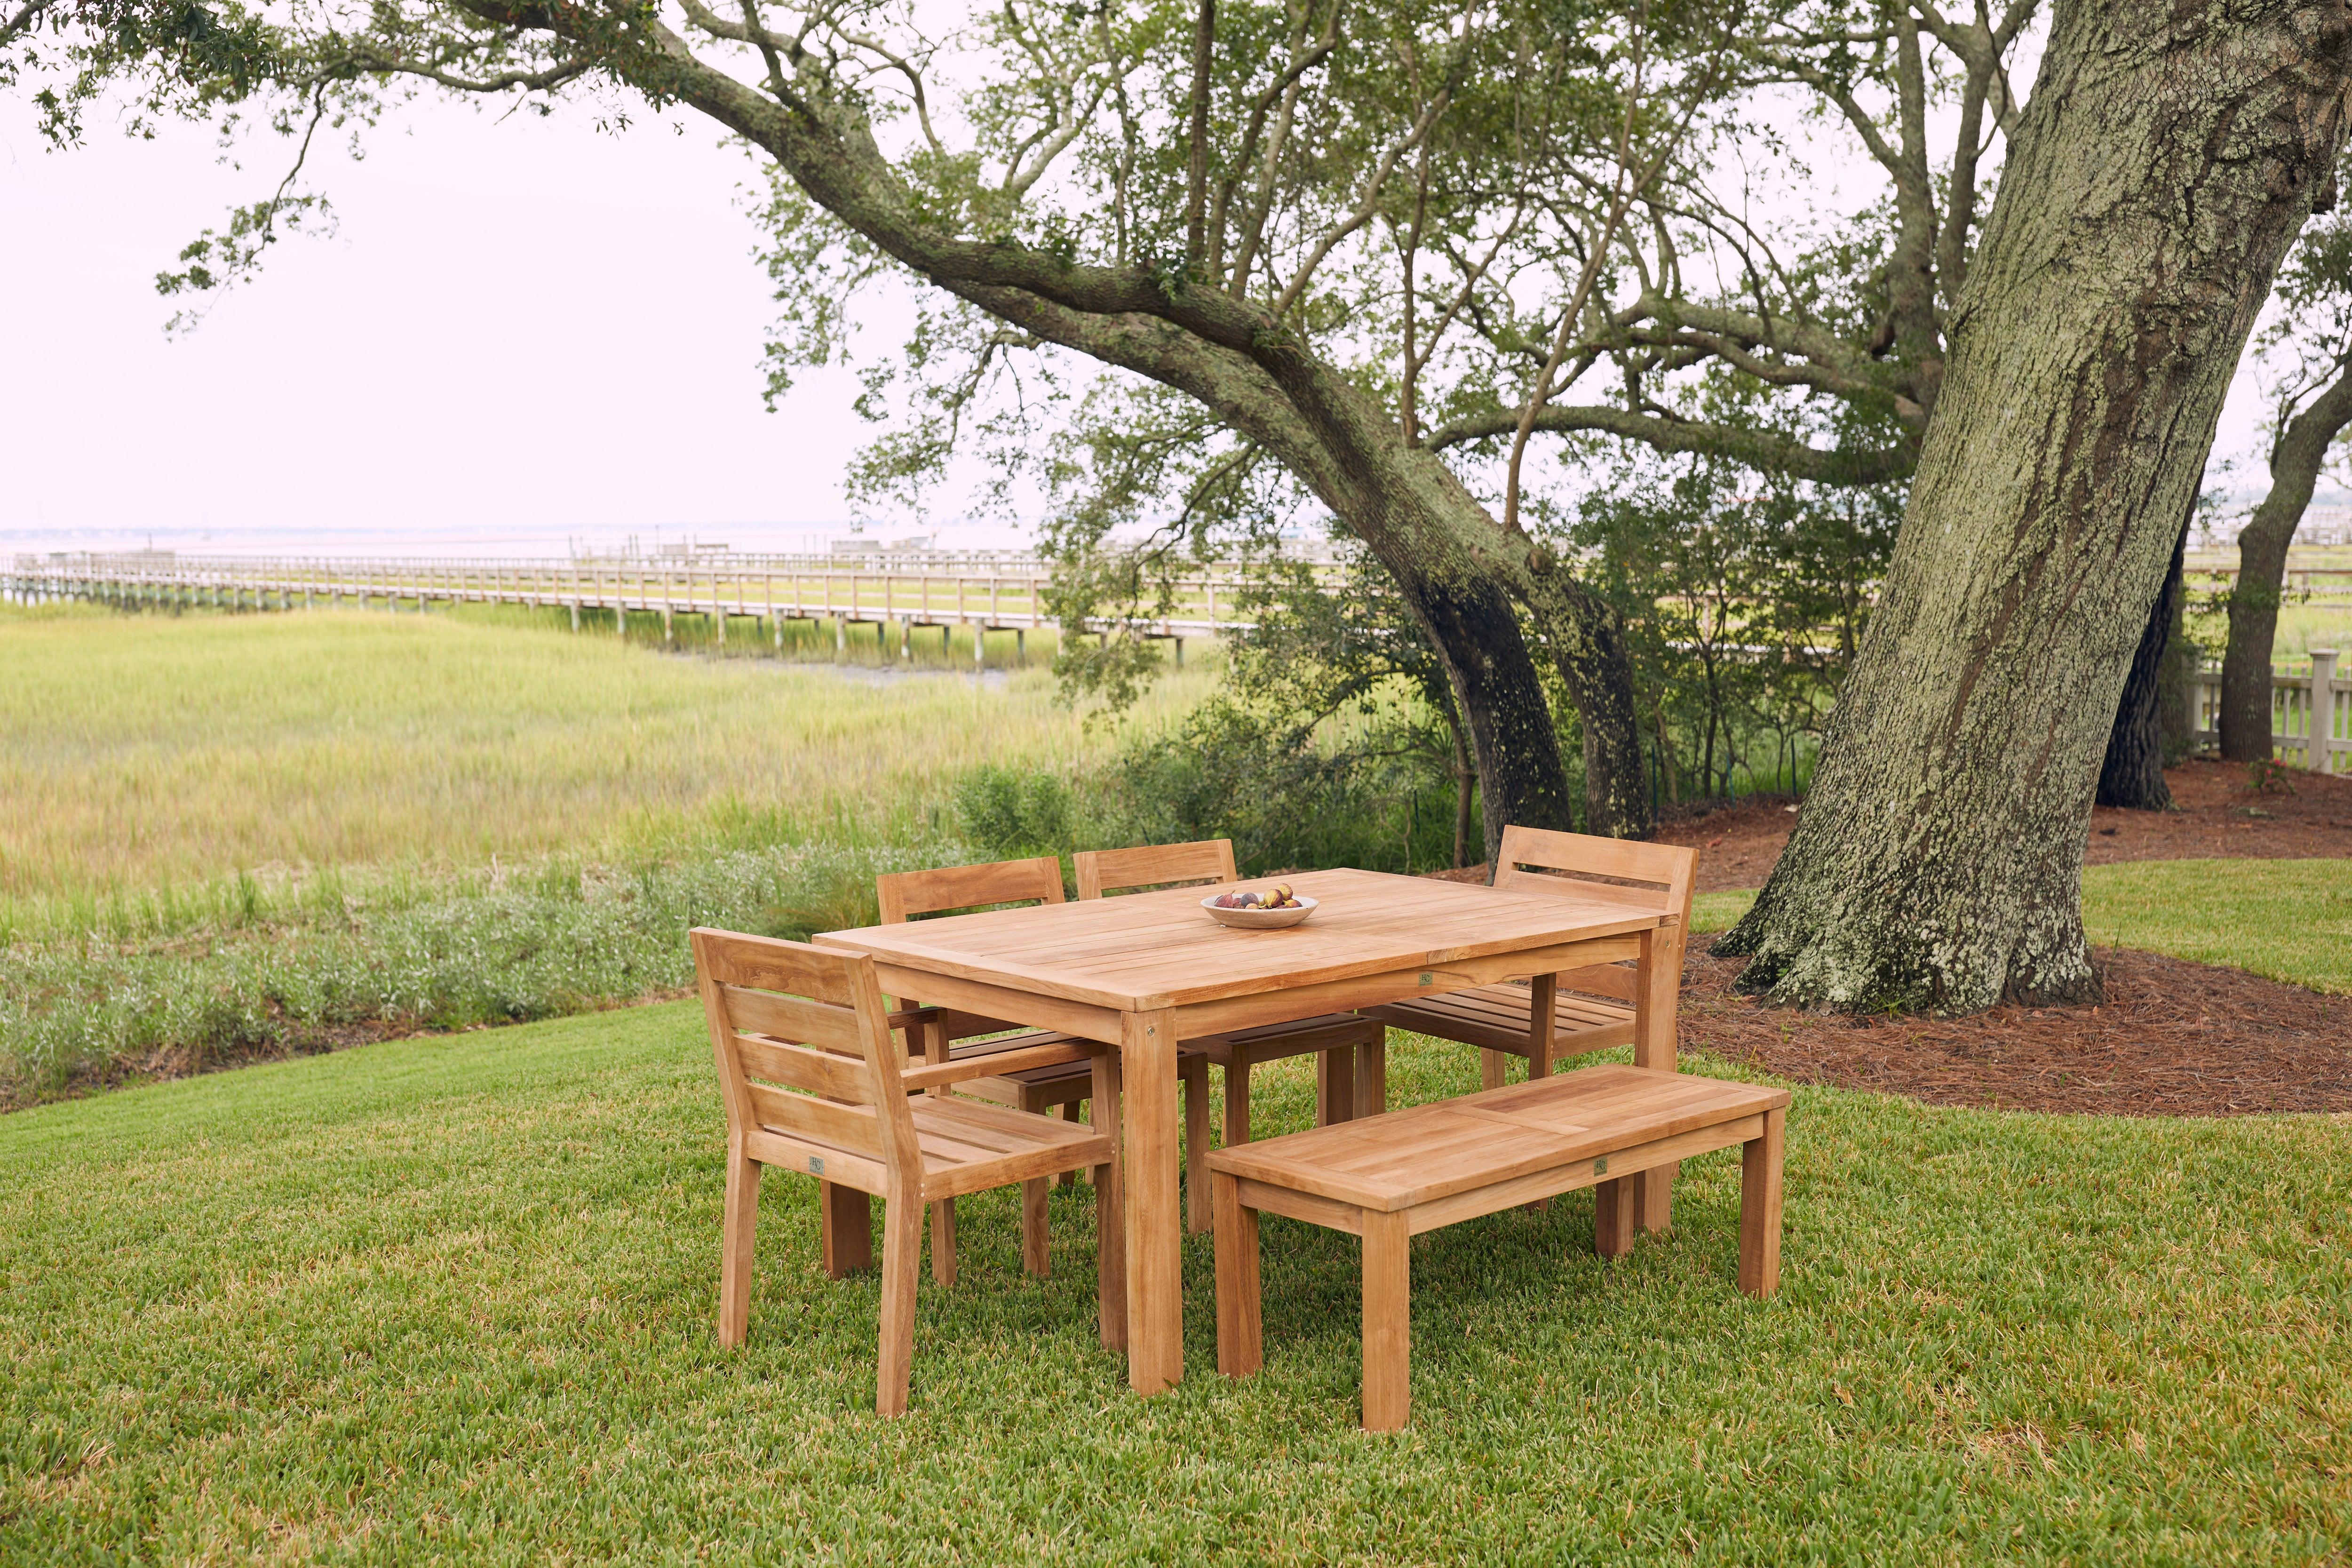 Teak Furniture Buying Guide: What You Need to Know